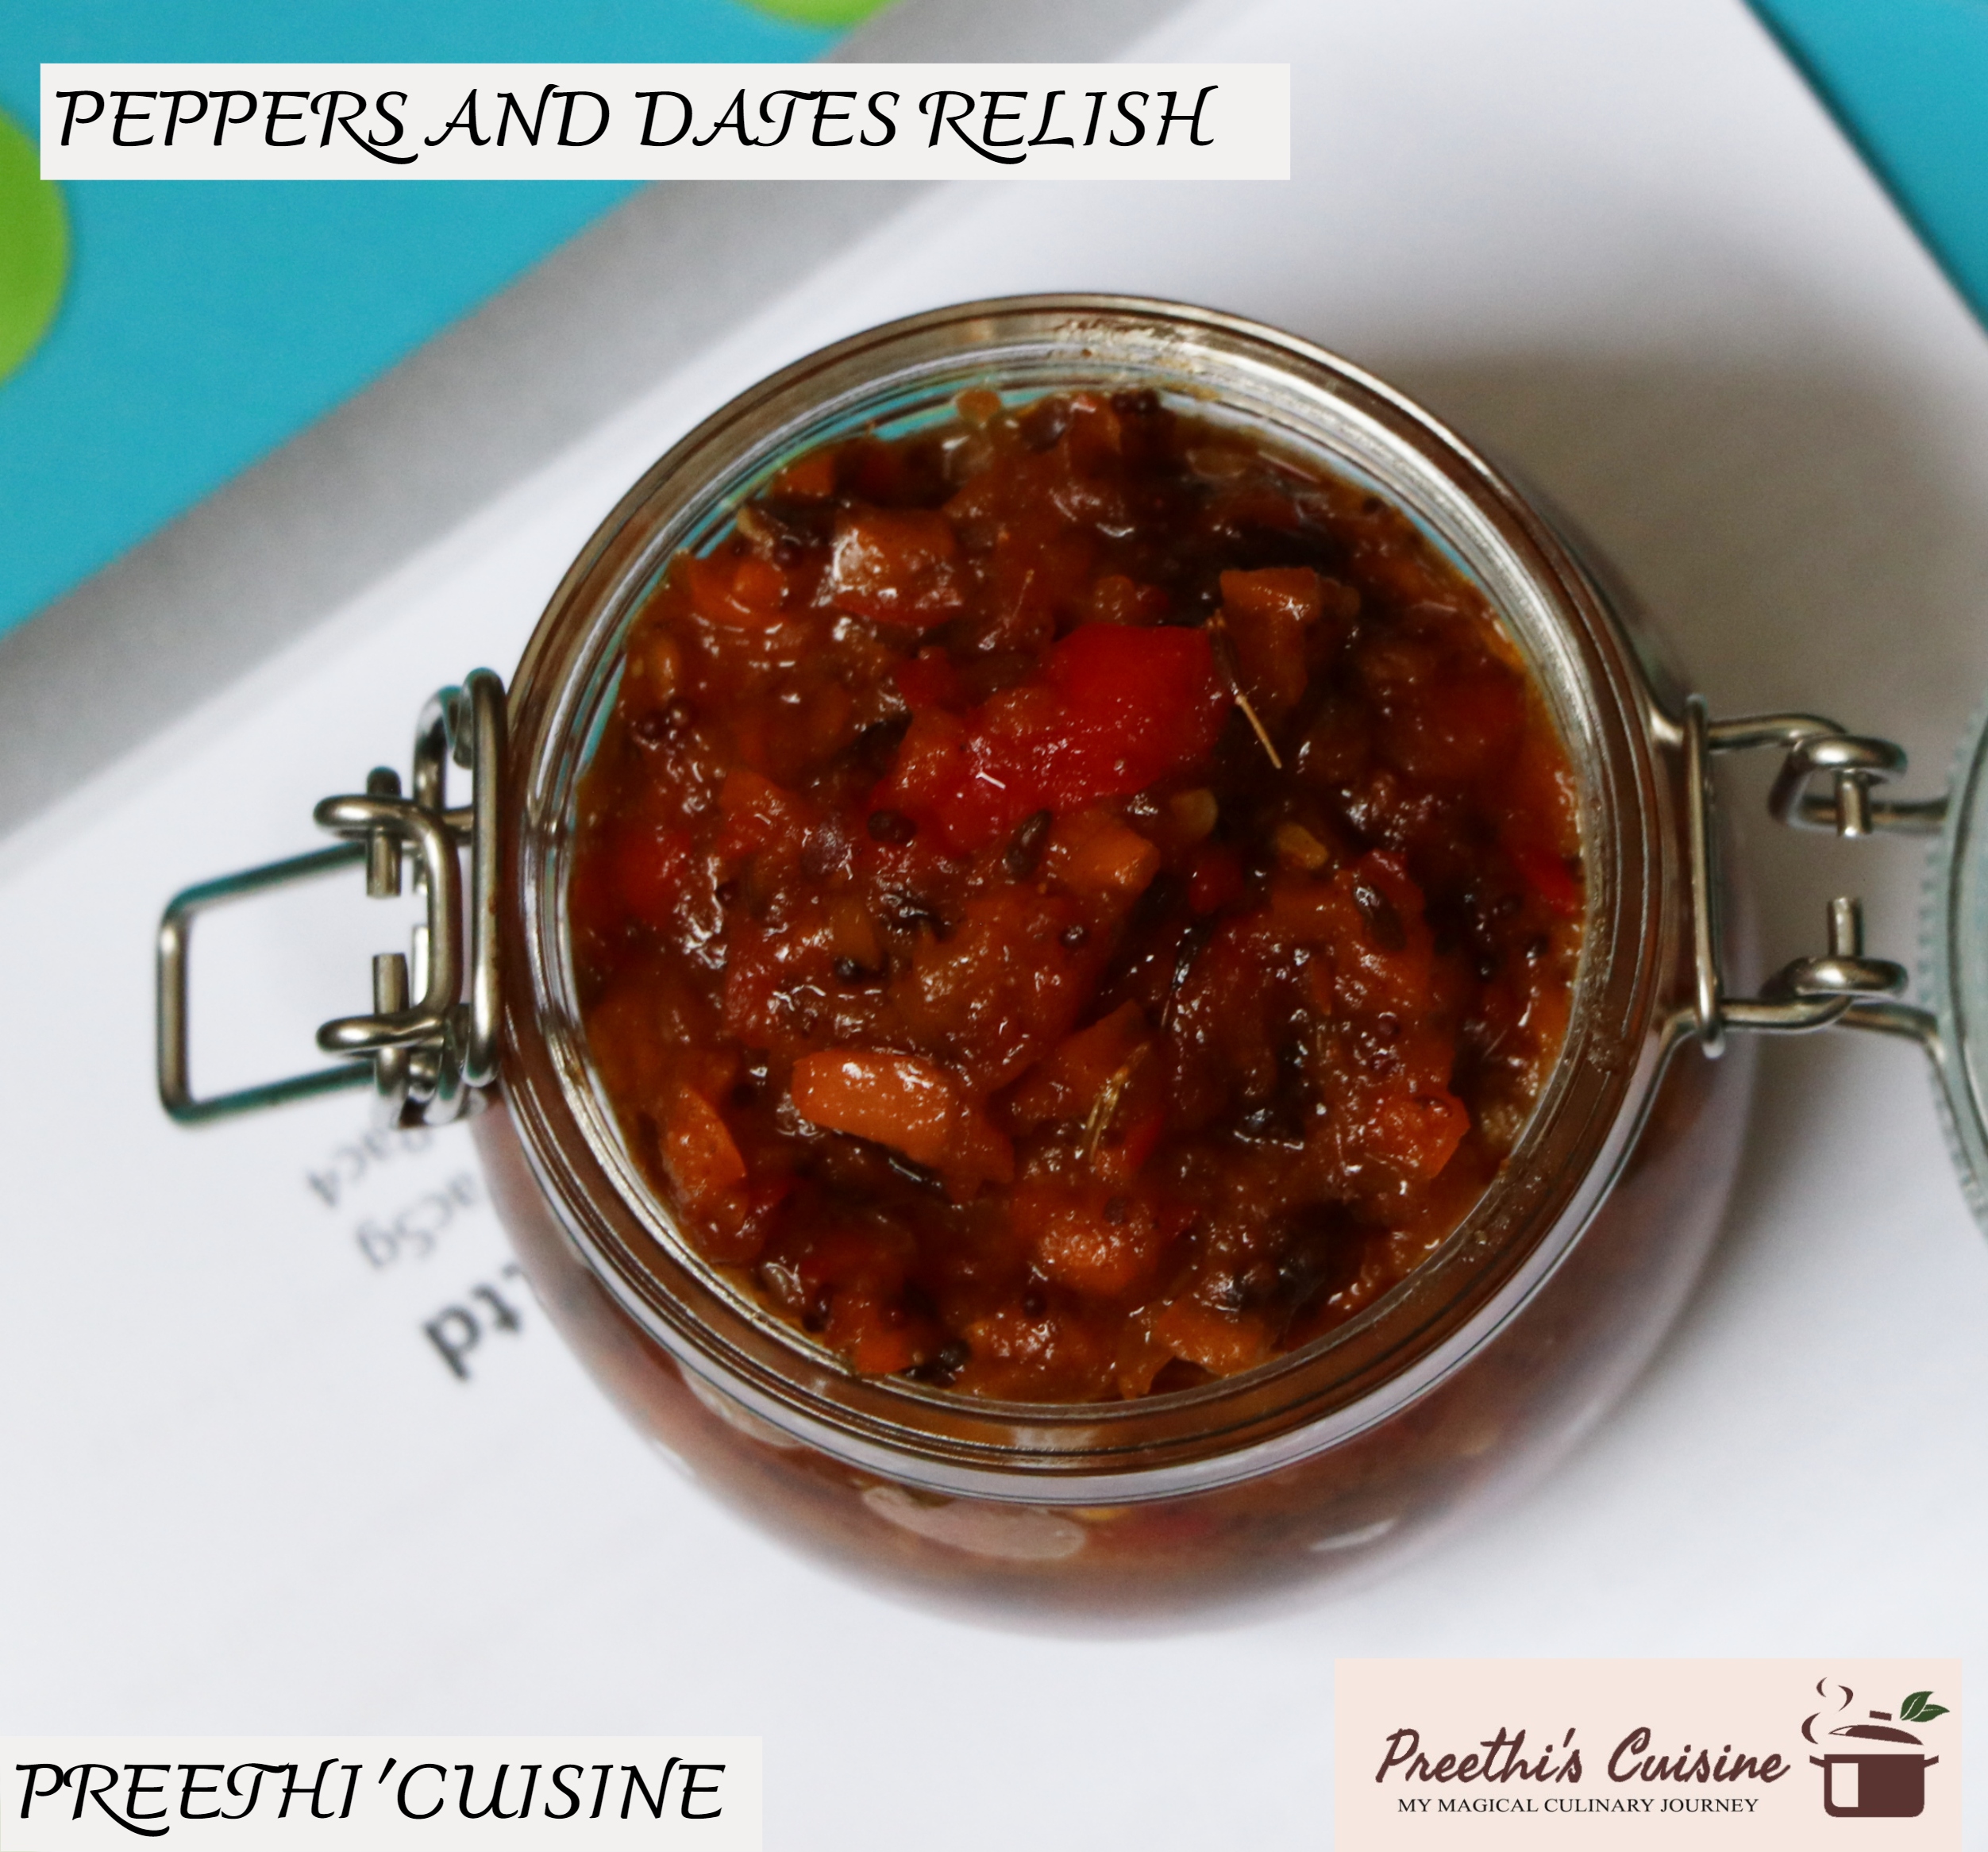 PEPPERS AND DATES RELISH